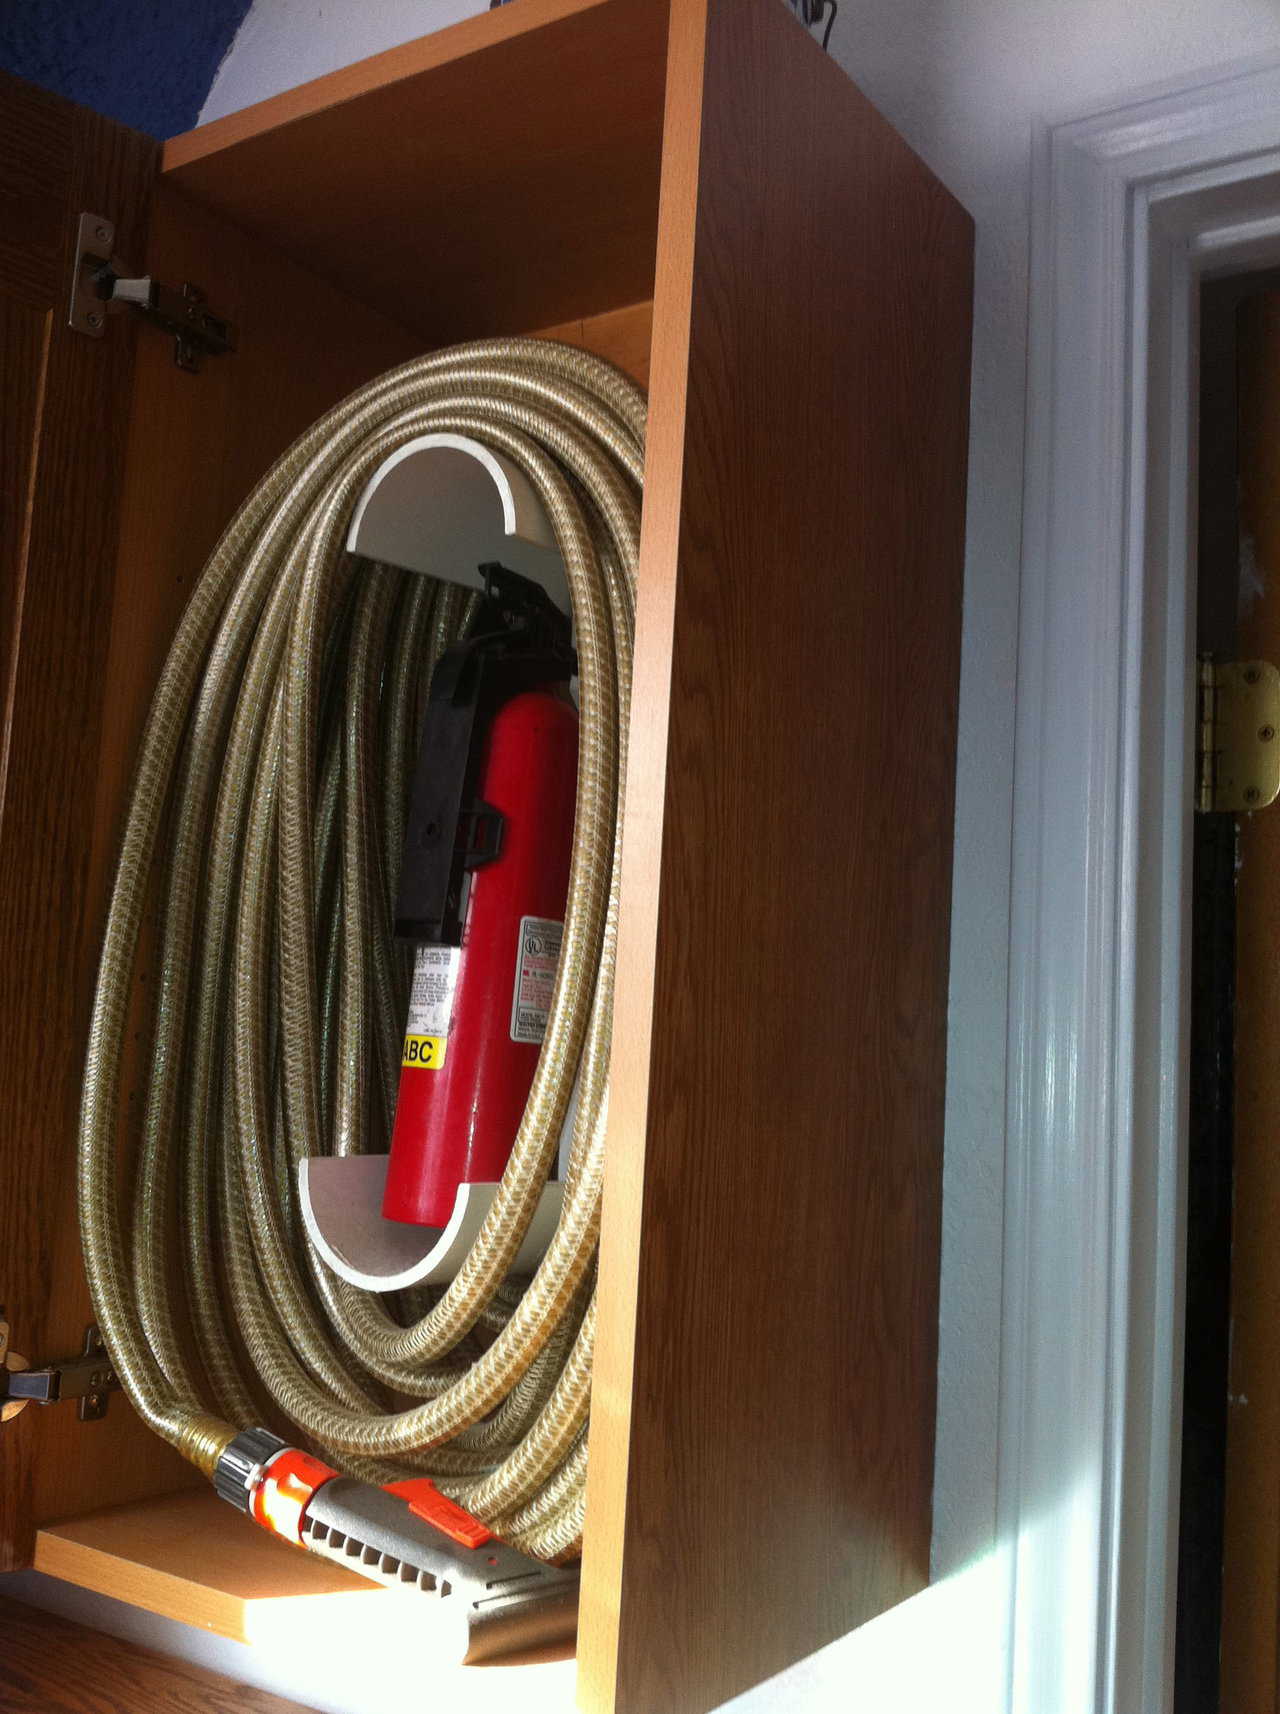 I have a good quality hose, in the right length for my home, rolled into the cabinet.